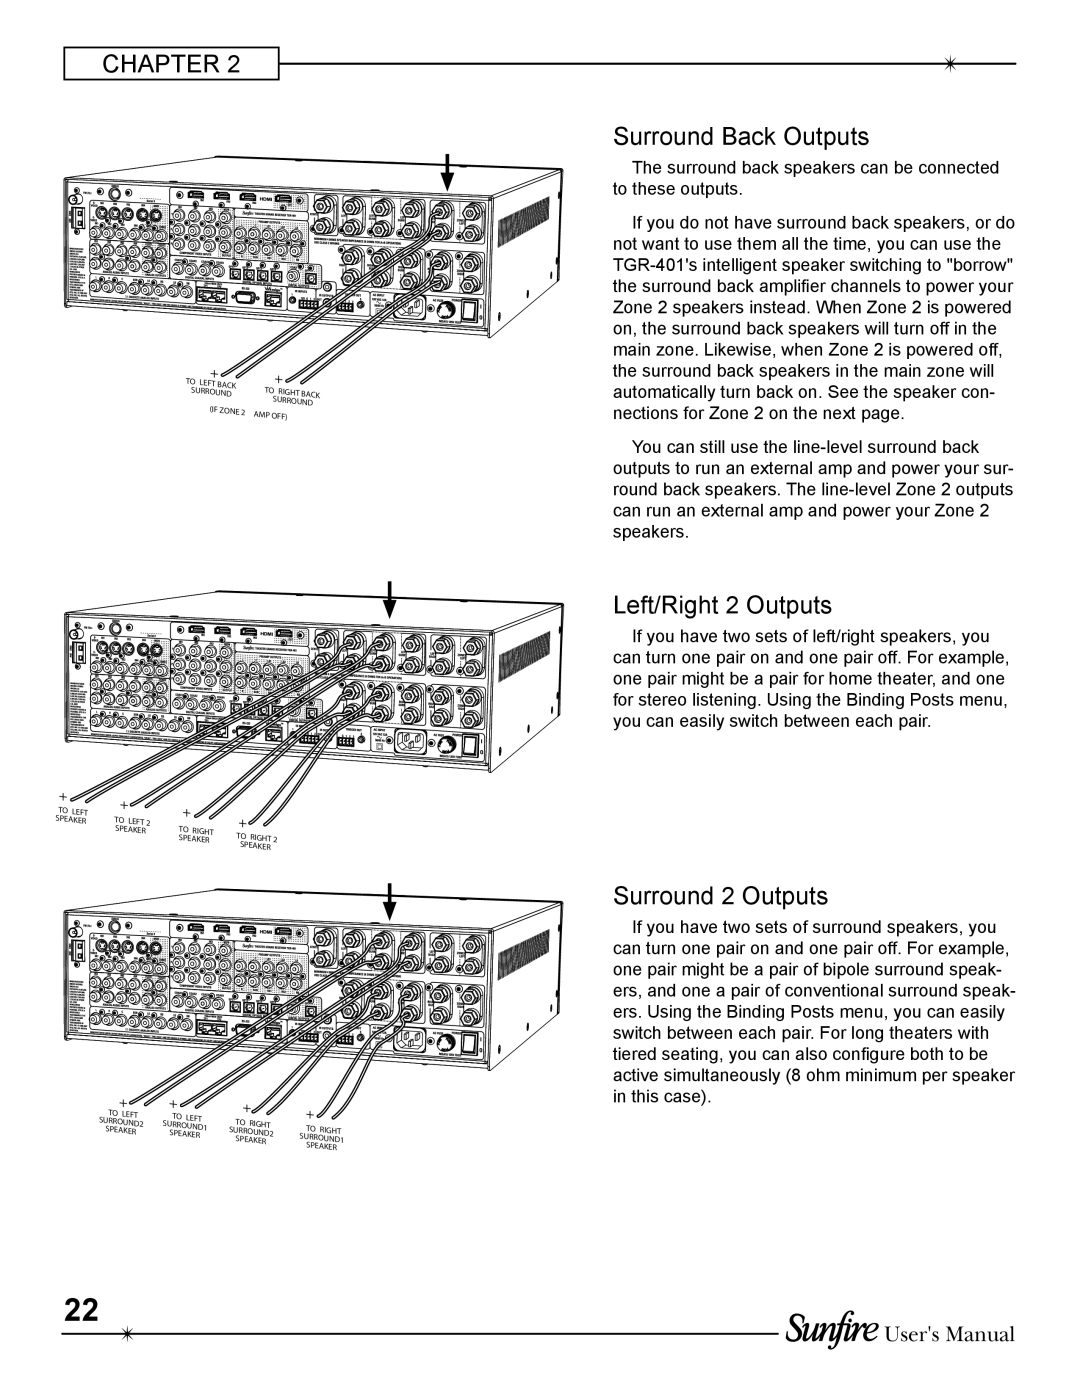 Sunfire TGR-401-230 manual Chapter, Surround Back Outputs, Left/Right 2 Outputs, Surround 2 Outputs, Users Manual 